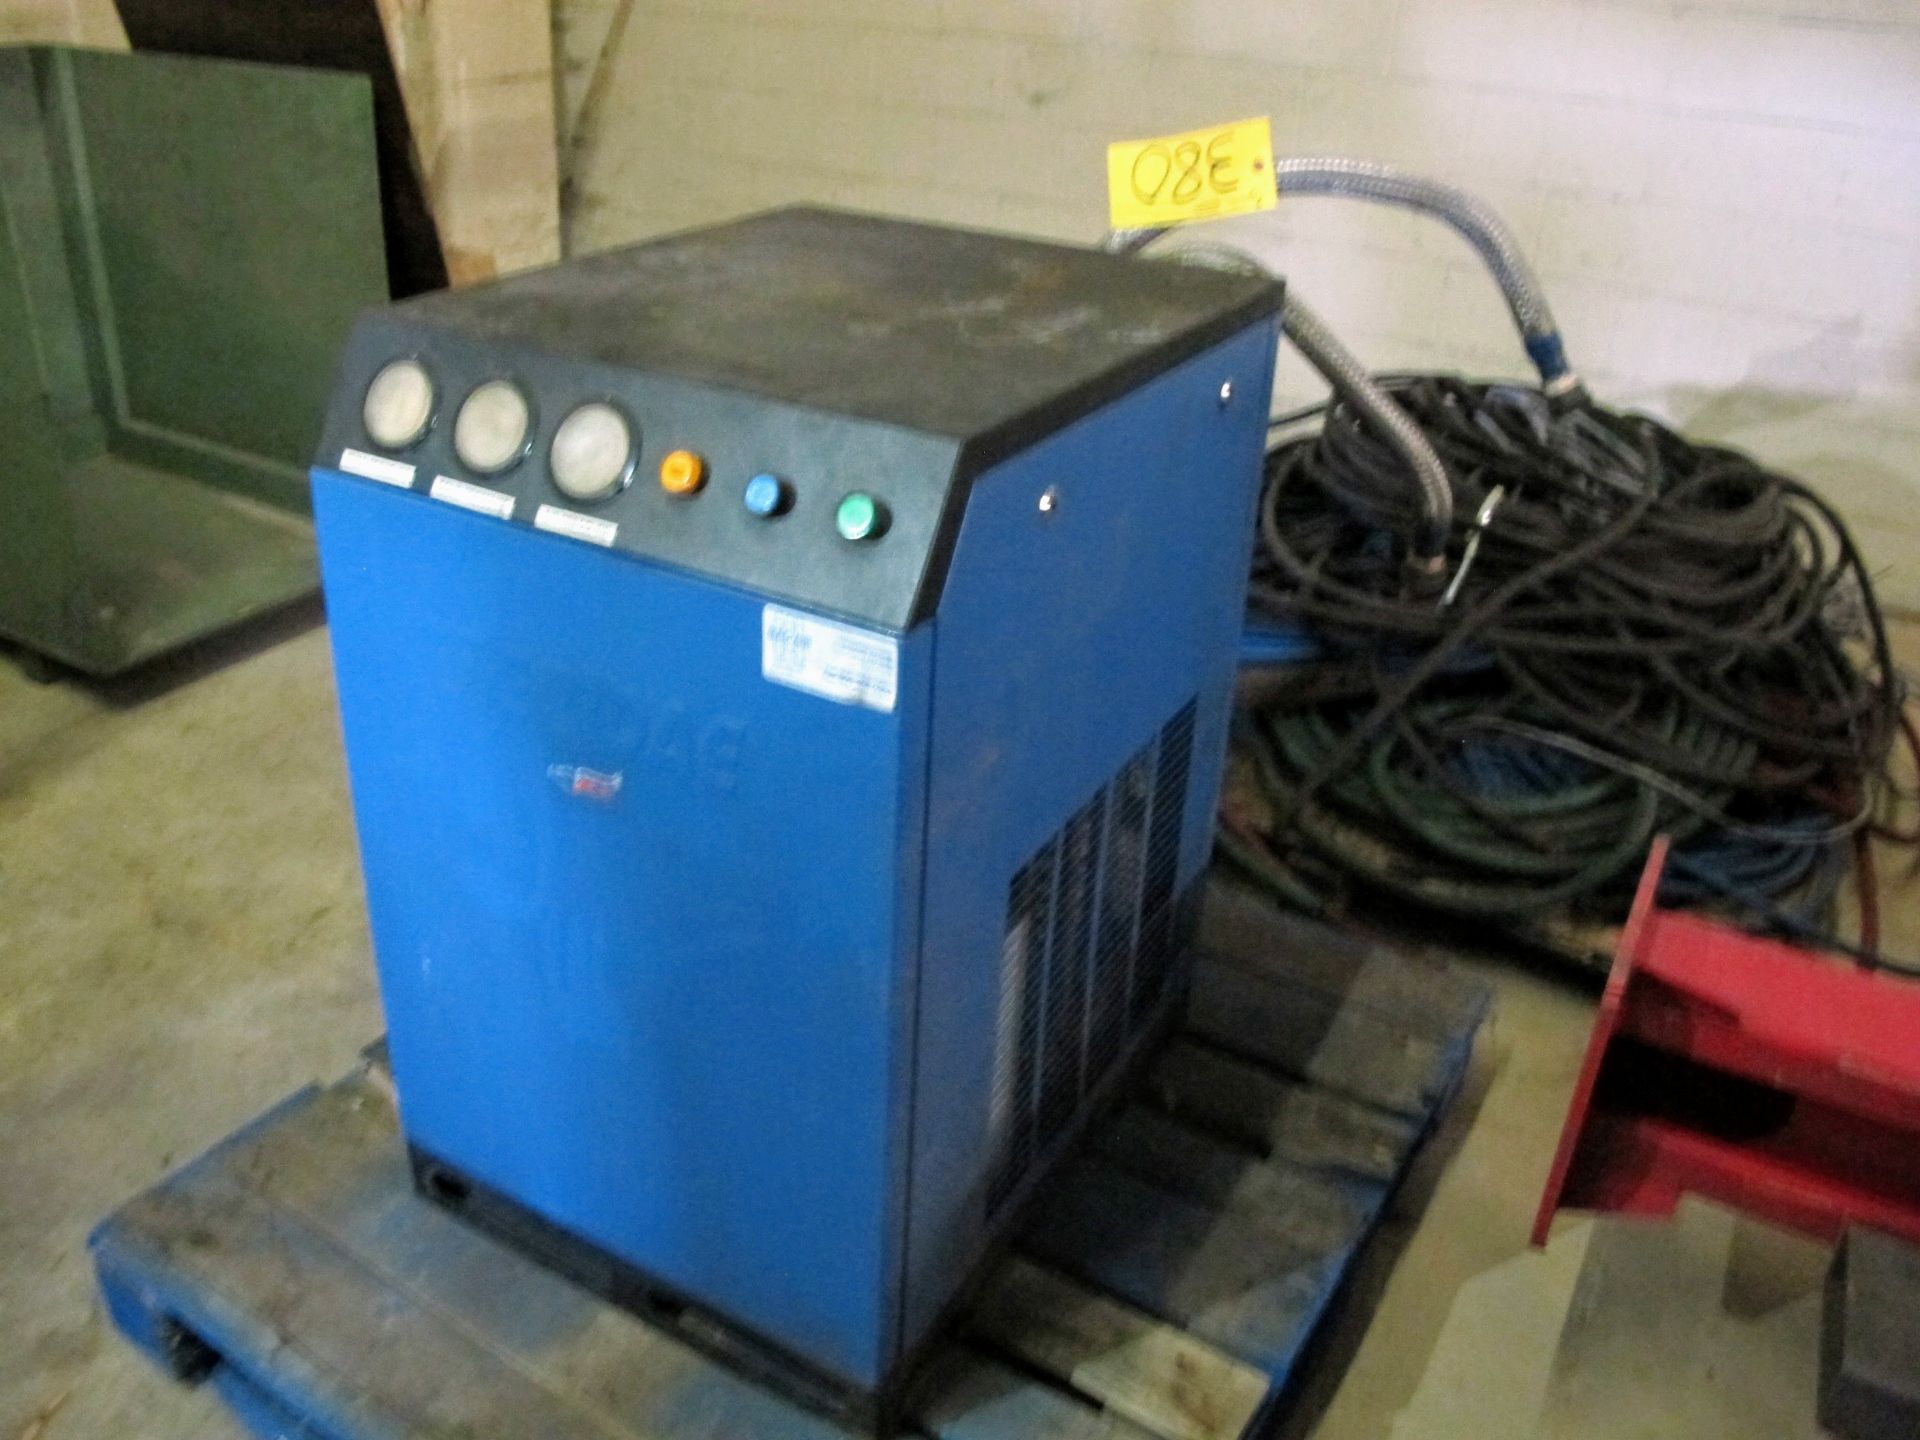 MACAIR ER/DAE AIR DRYER (LOCATED AT 402725 GRAY ROAD 4 WEST, DURHAM, ON)